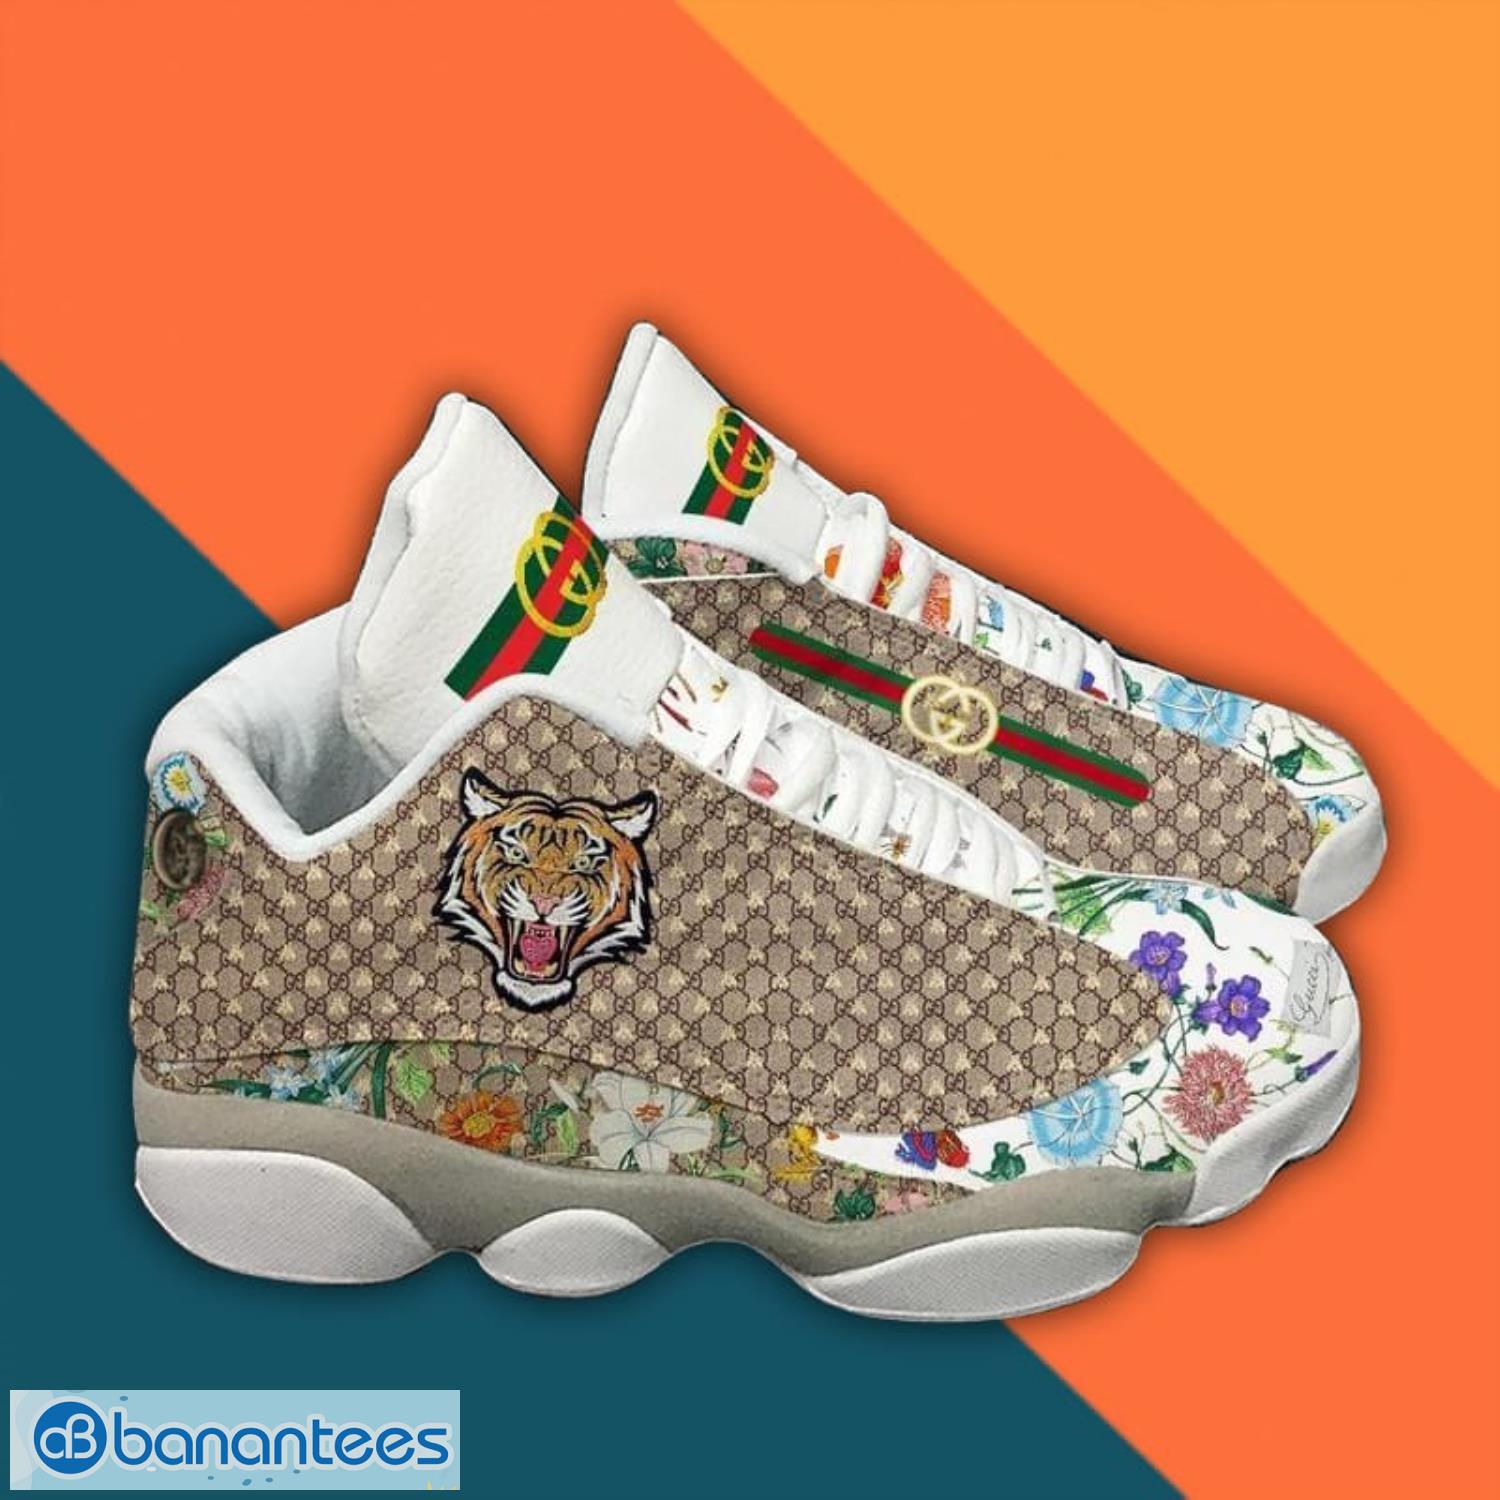 Gucci Tiger And Flowers Air Jordan 13 Sneaker Shoes Product Photo 1